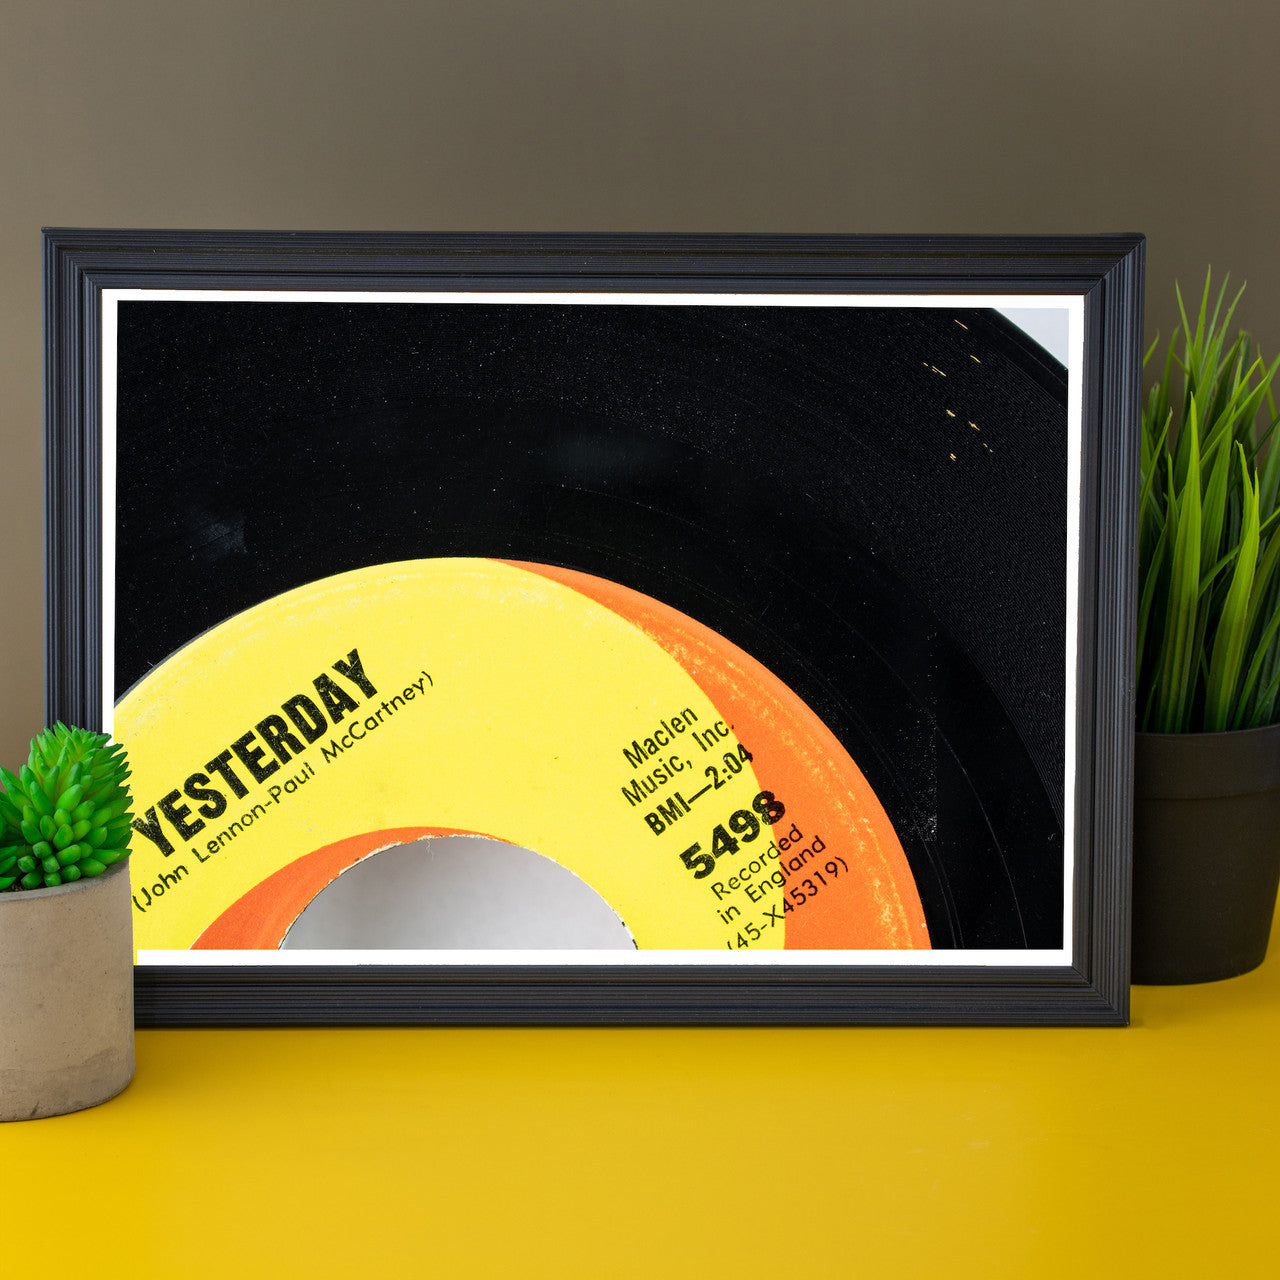 Modern art photo of the Beatles "Yesterday" 45 Record displayed in your office